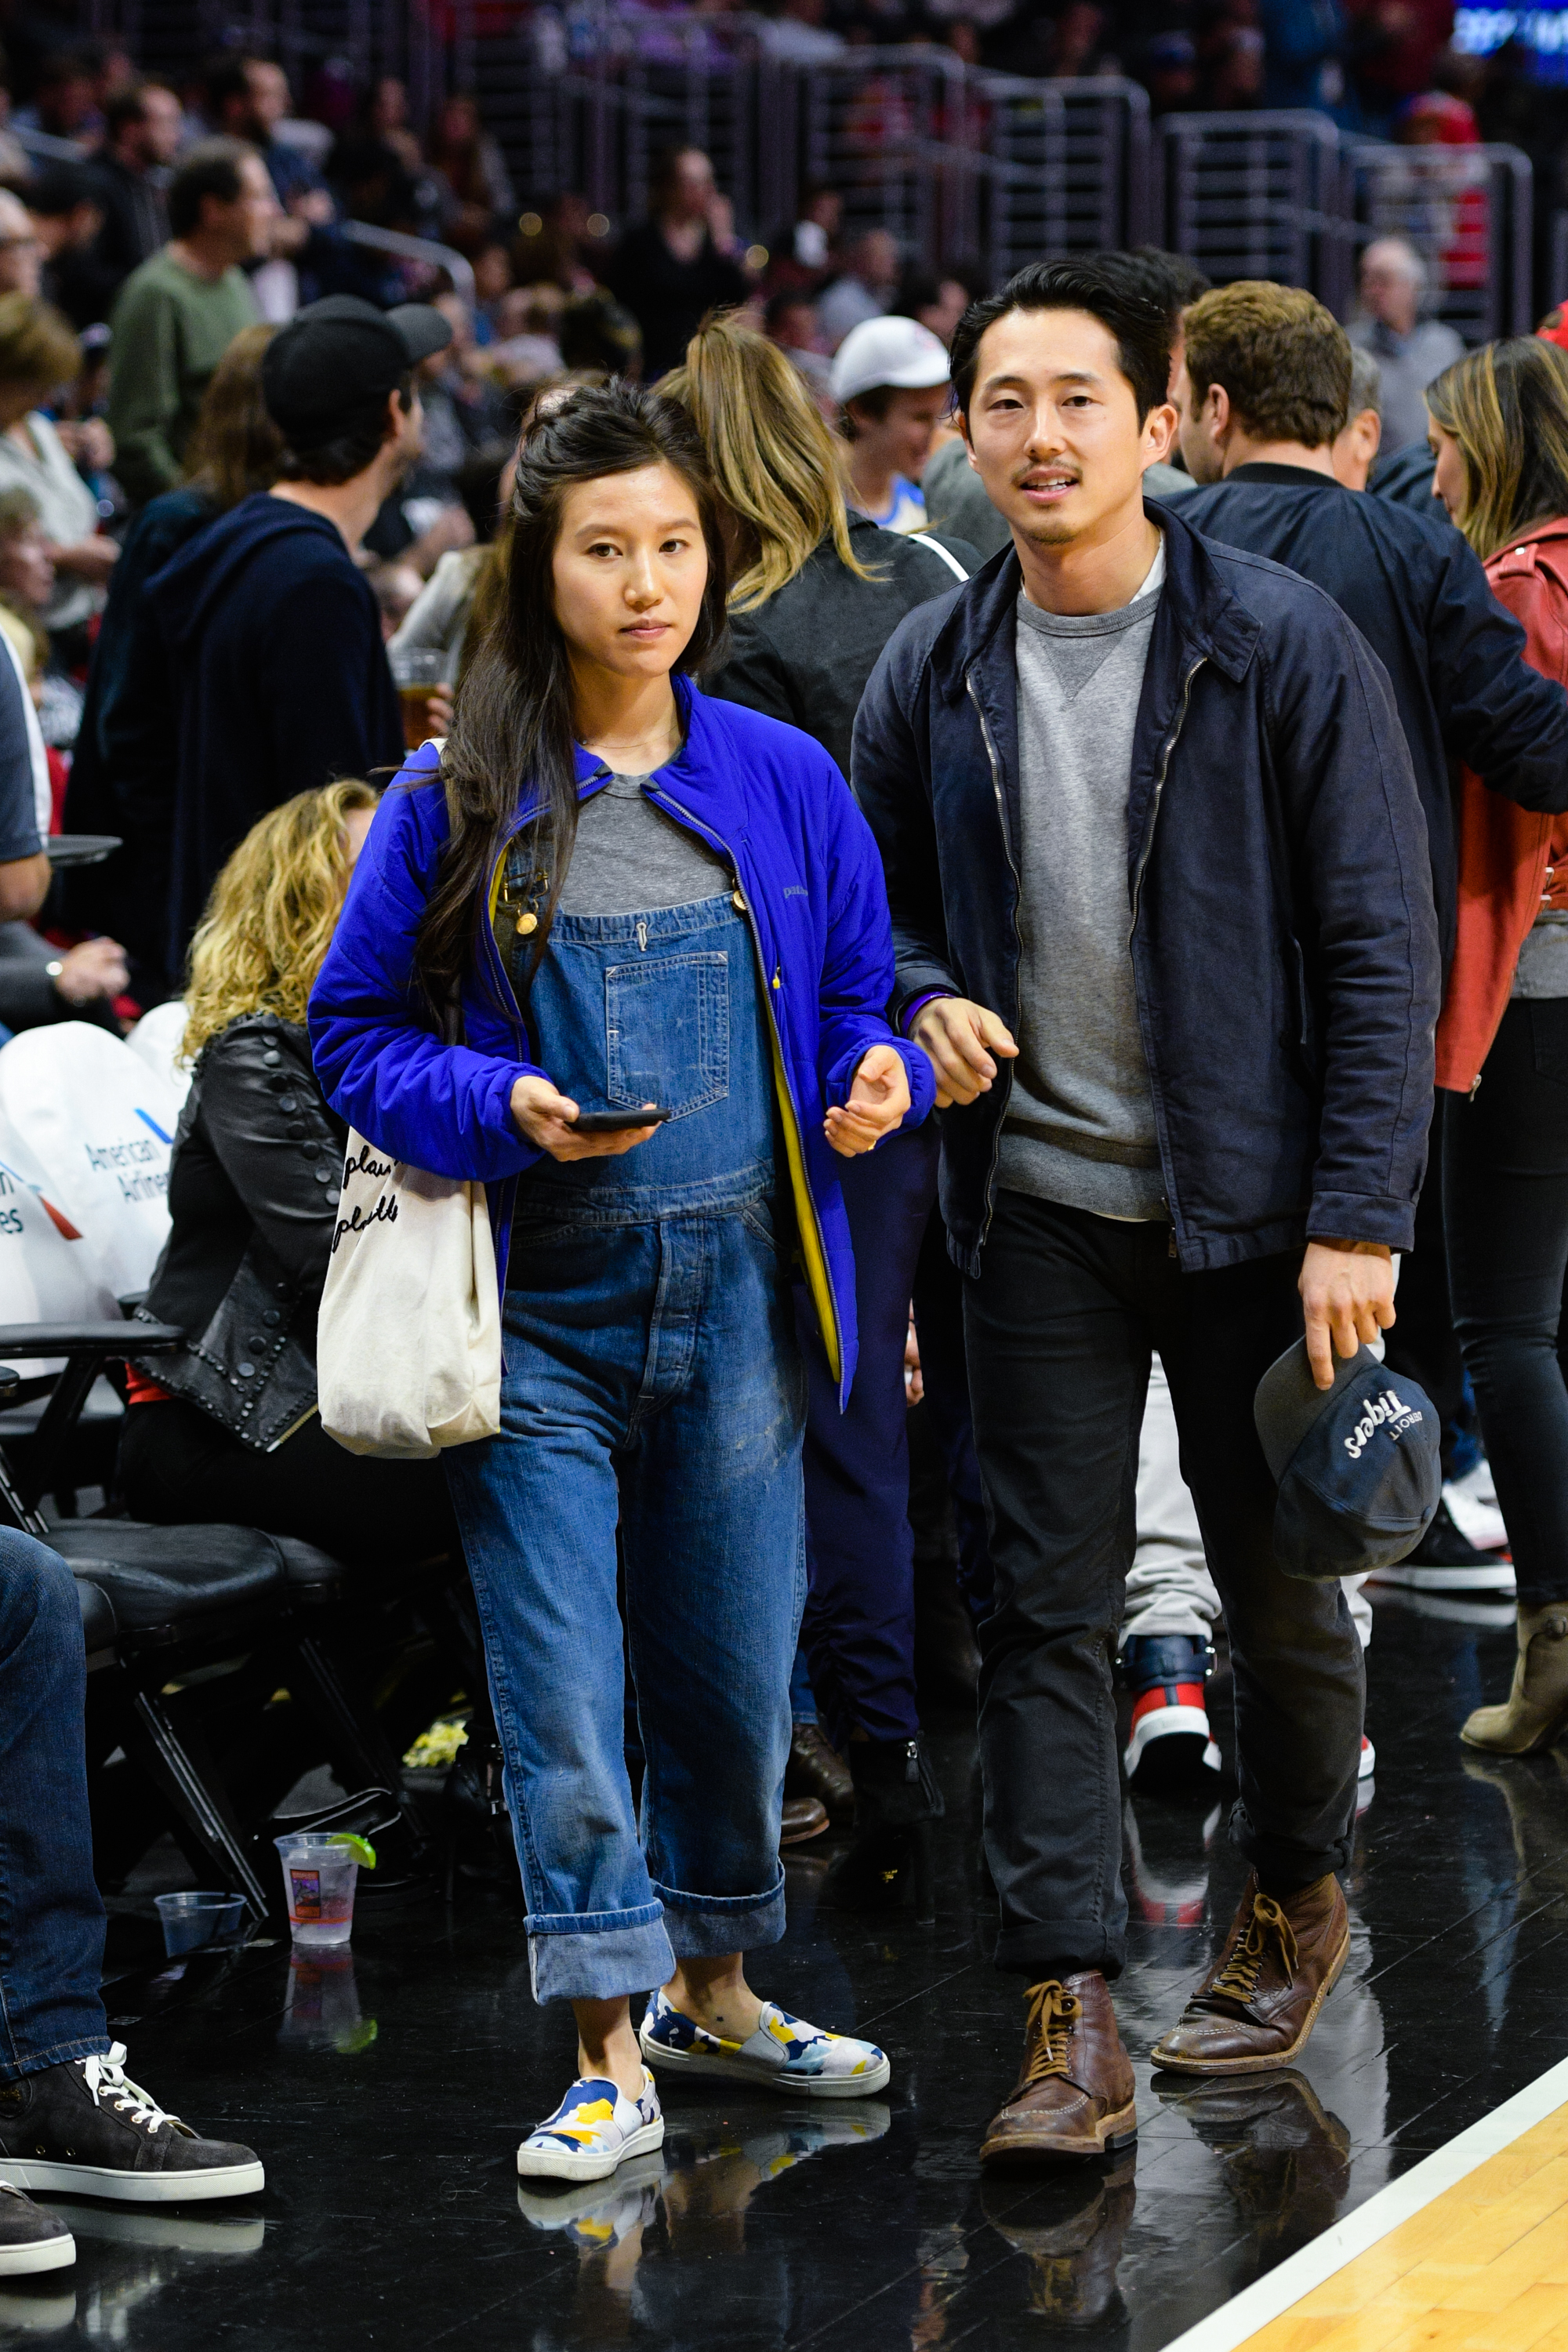 Joana Pak and Steven Yeun are pictured at a basketball game between the Detroit Pistons and the Los Angeles Clippers at Staples Center on November 7, 2016, in Los Angeles, California | Source: Getty Images